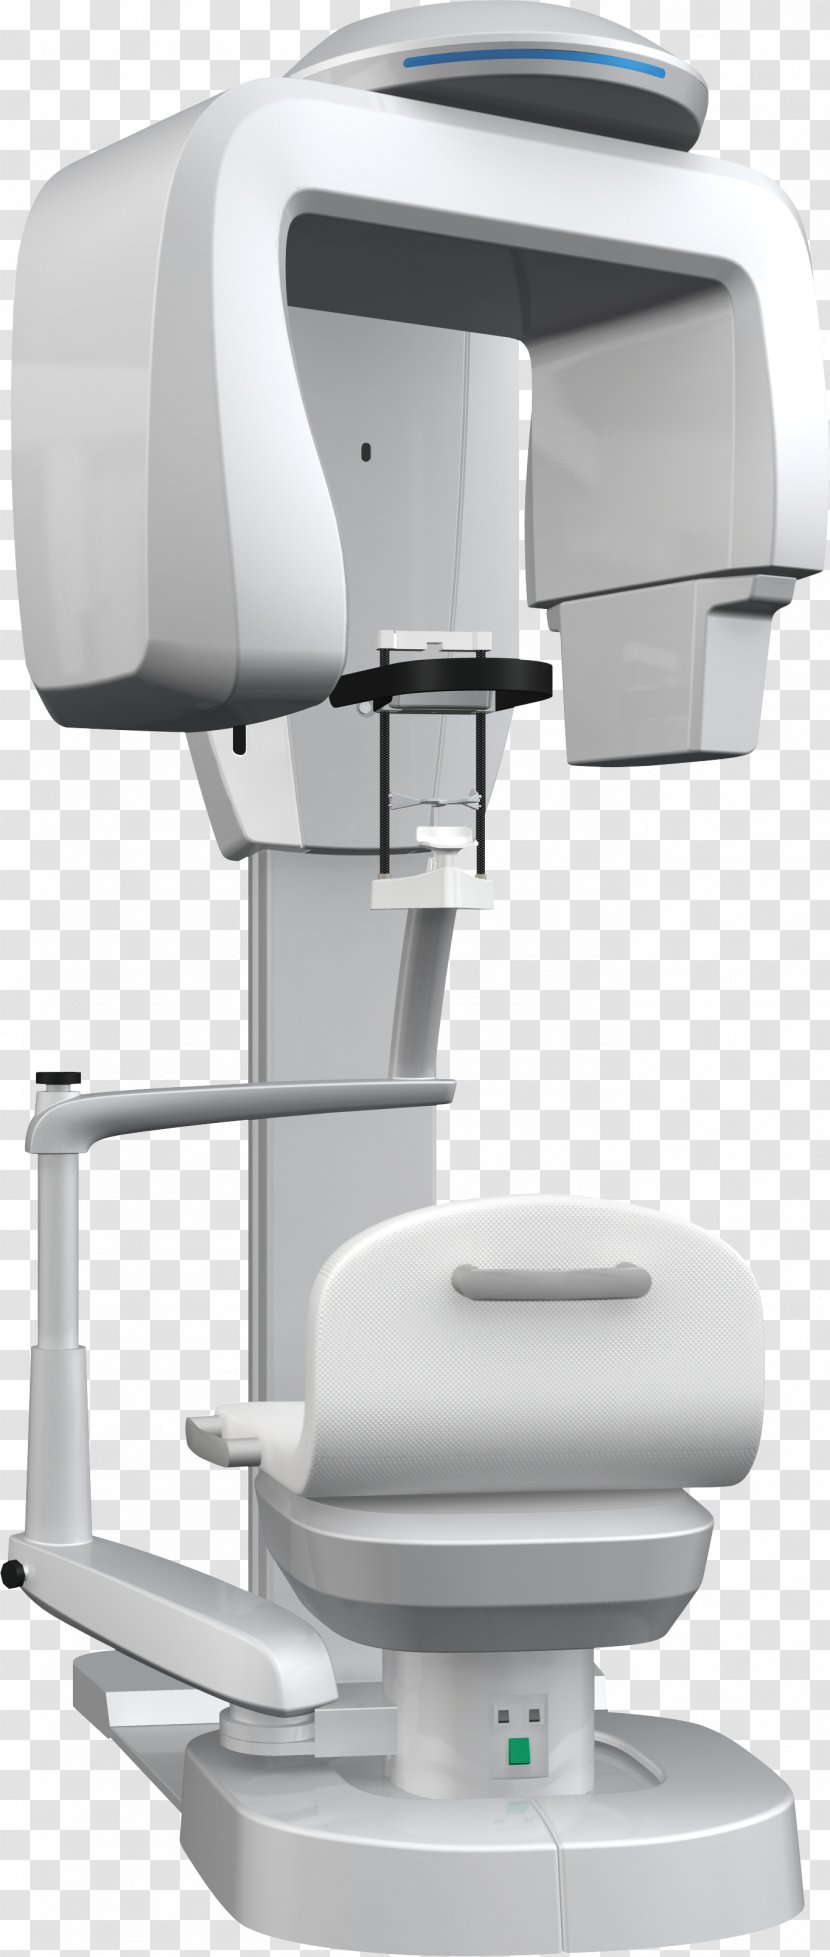 Cone Beam Computed Tomography Dentistry Image Scanner Endodontics - Medical - 3d Dental Treatment For Toothache Transparent PNG